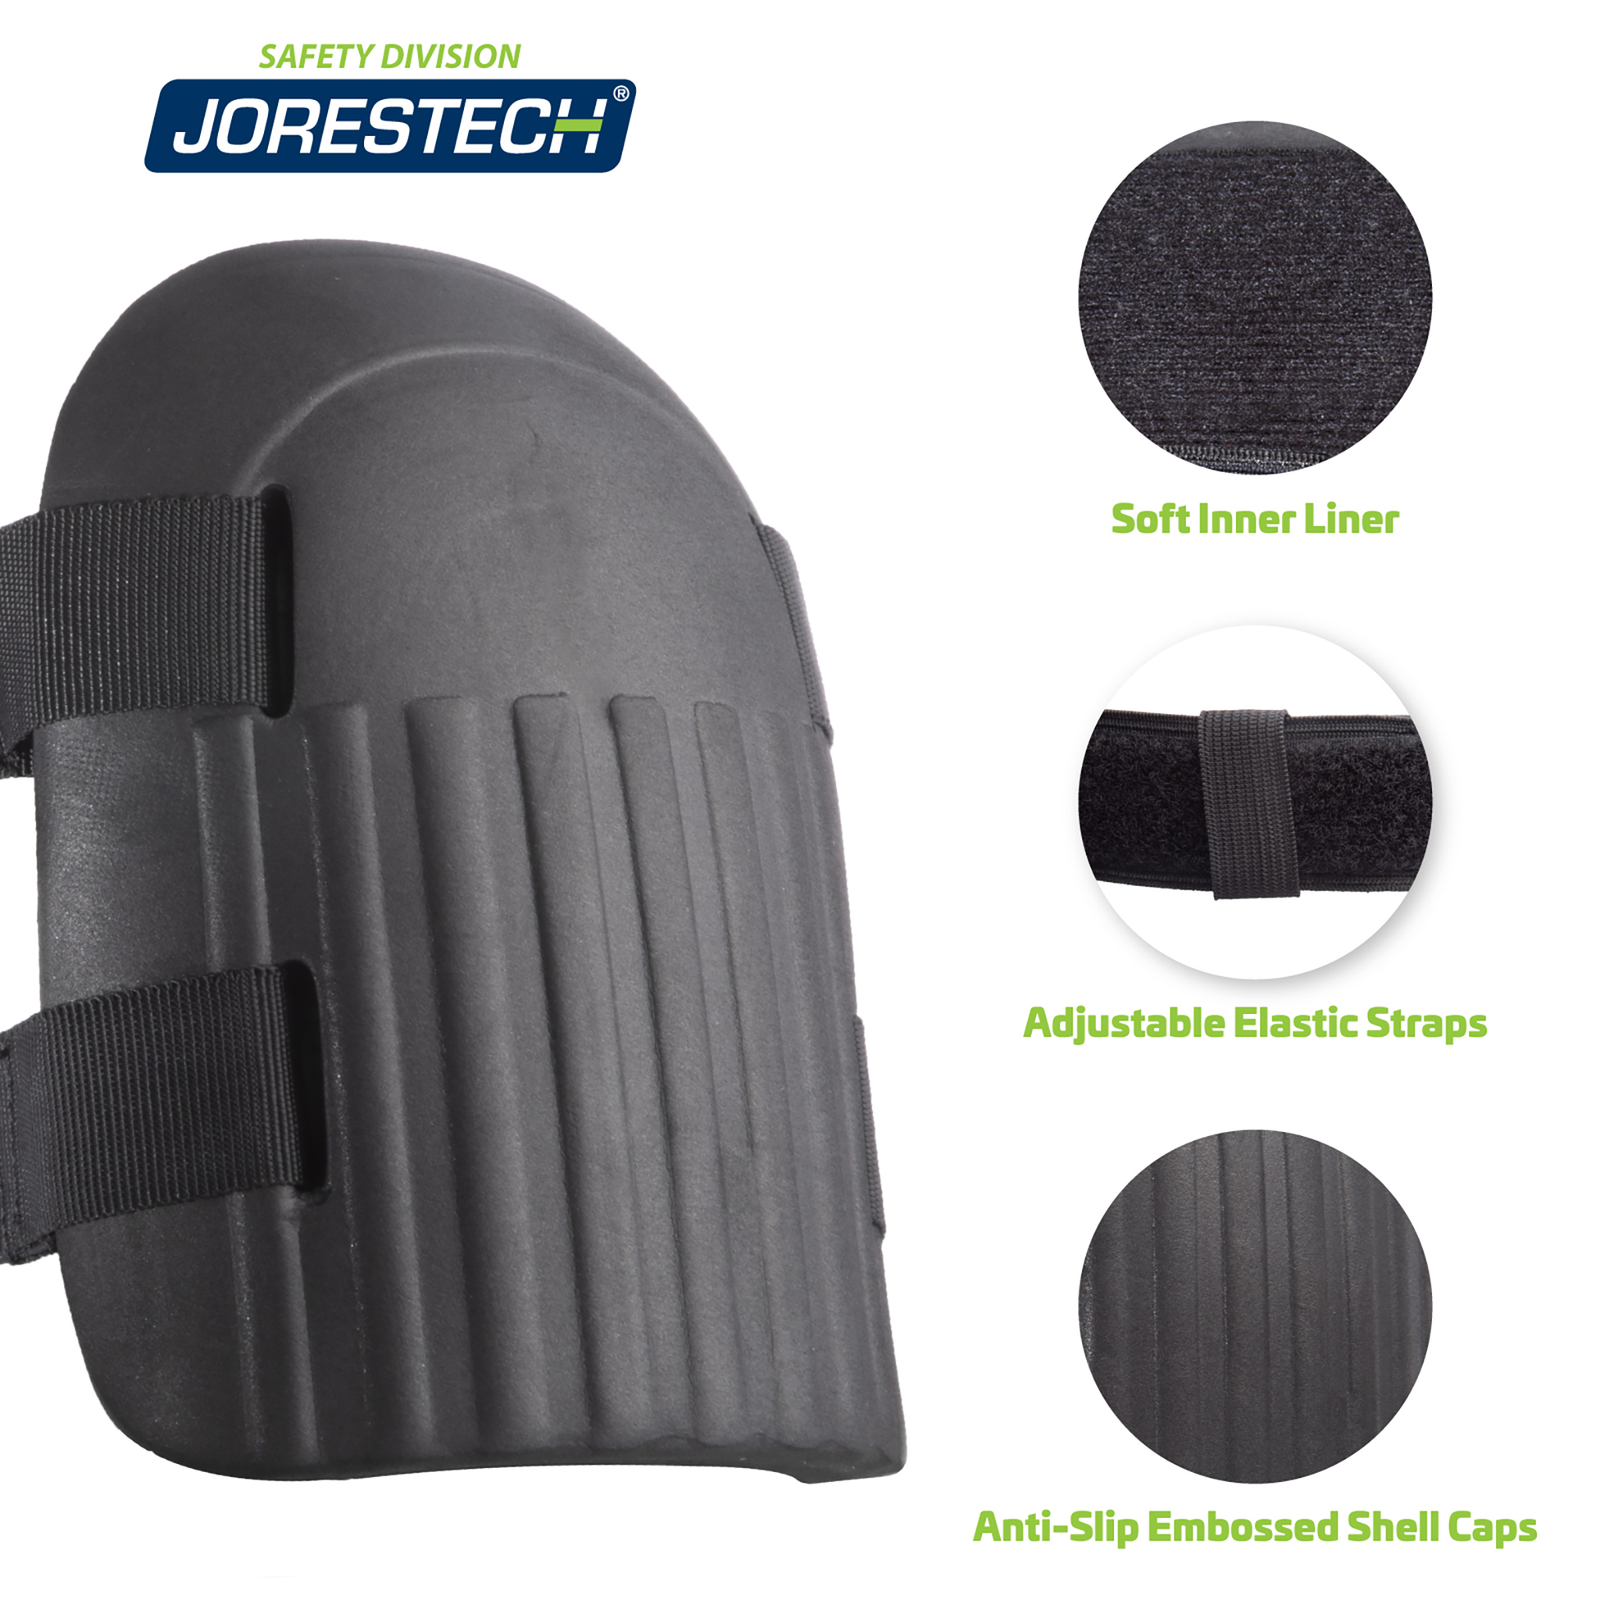 Close up of the JORESTECH® anti-skid foam knee pads and 3 call out describing: soft inner liner, adjustable elastic strap, and anti-slip embossed shell caps. Image of the foam knee pad and its parts